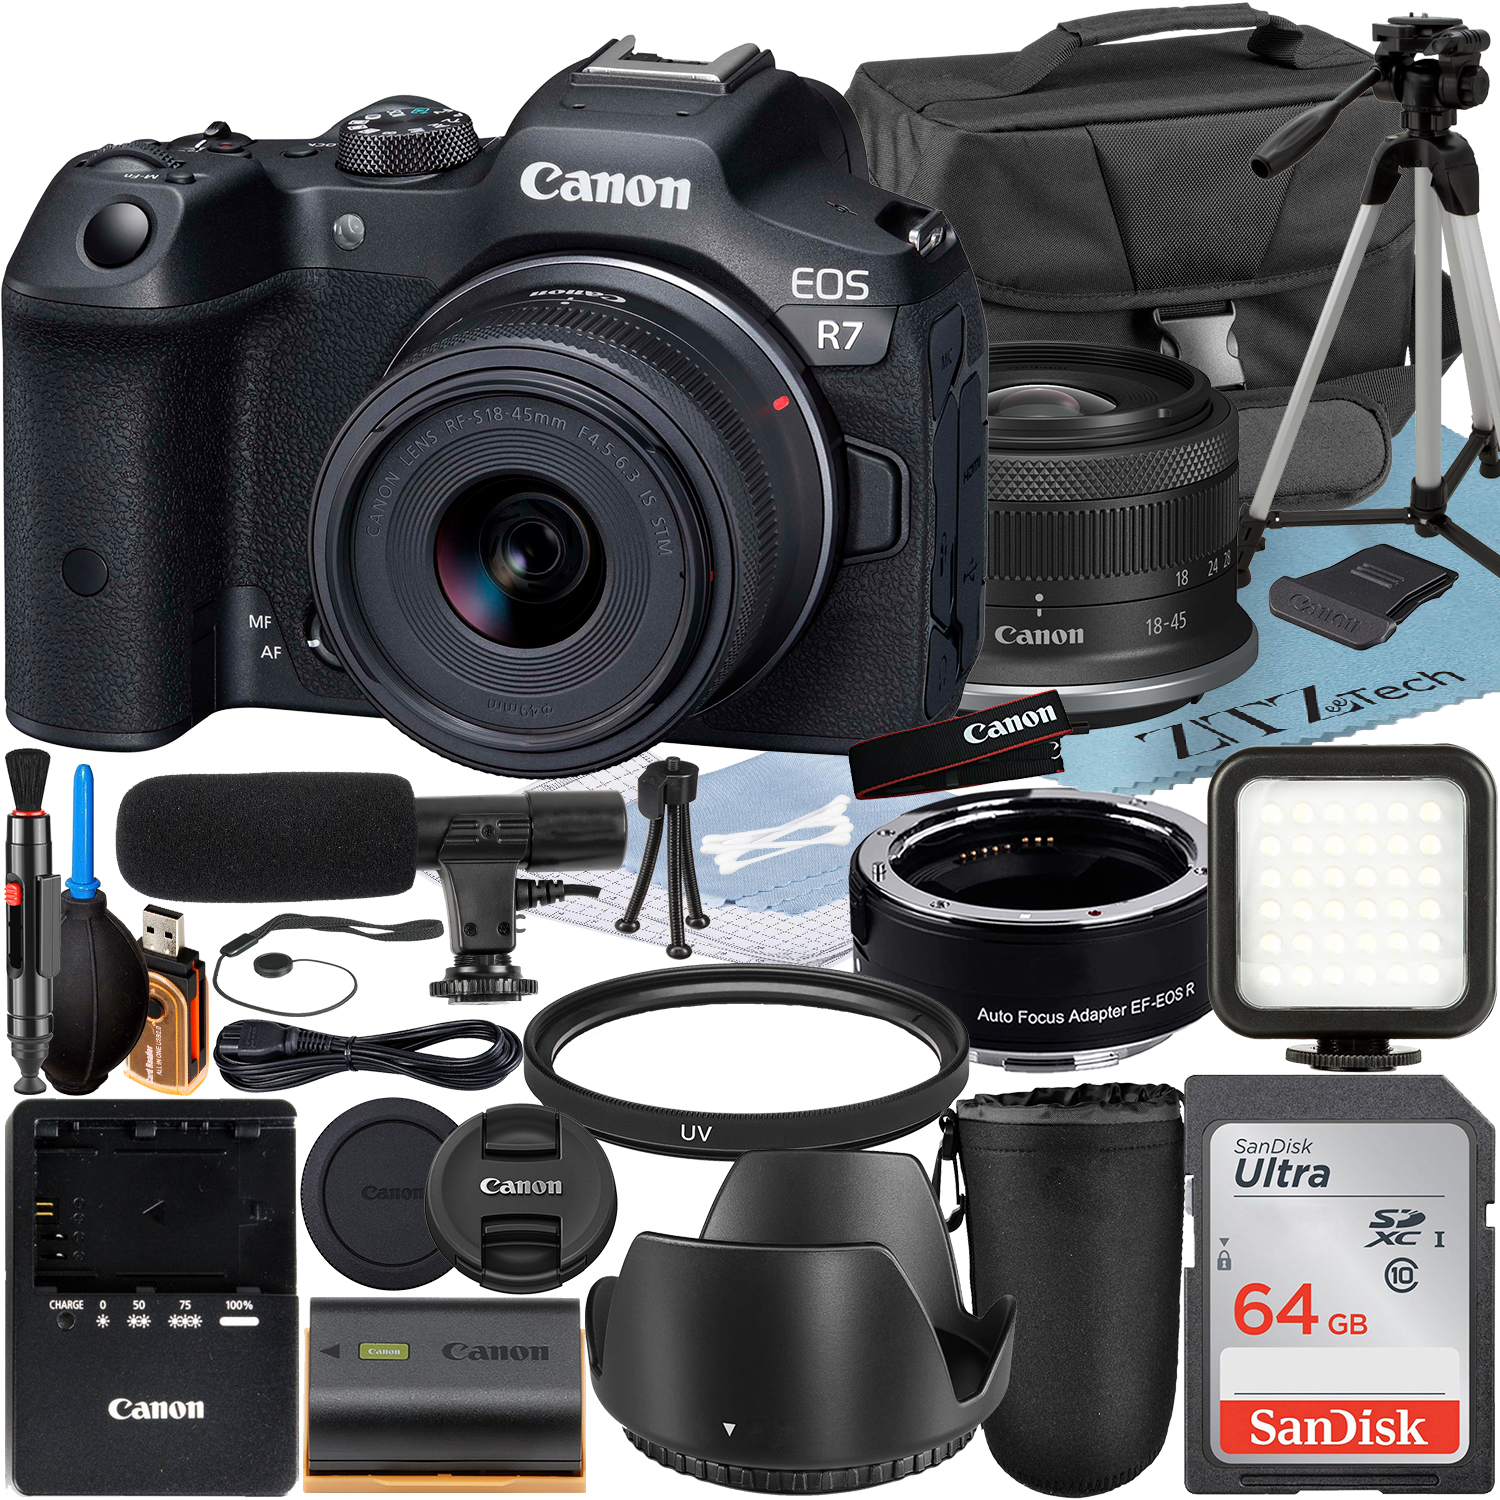 Canon EOS R7 Mirrorless Camera with RF-S 18-45mm Lens + Mount Adapter + SanDisk 64GB Memory Card + Case + LED Flash + ZeeTech Accessory Bundle